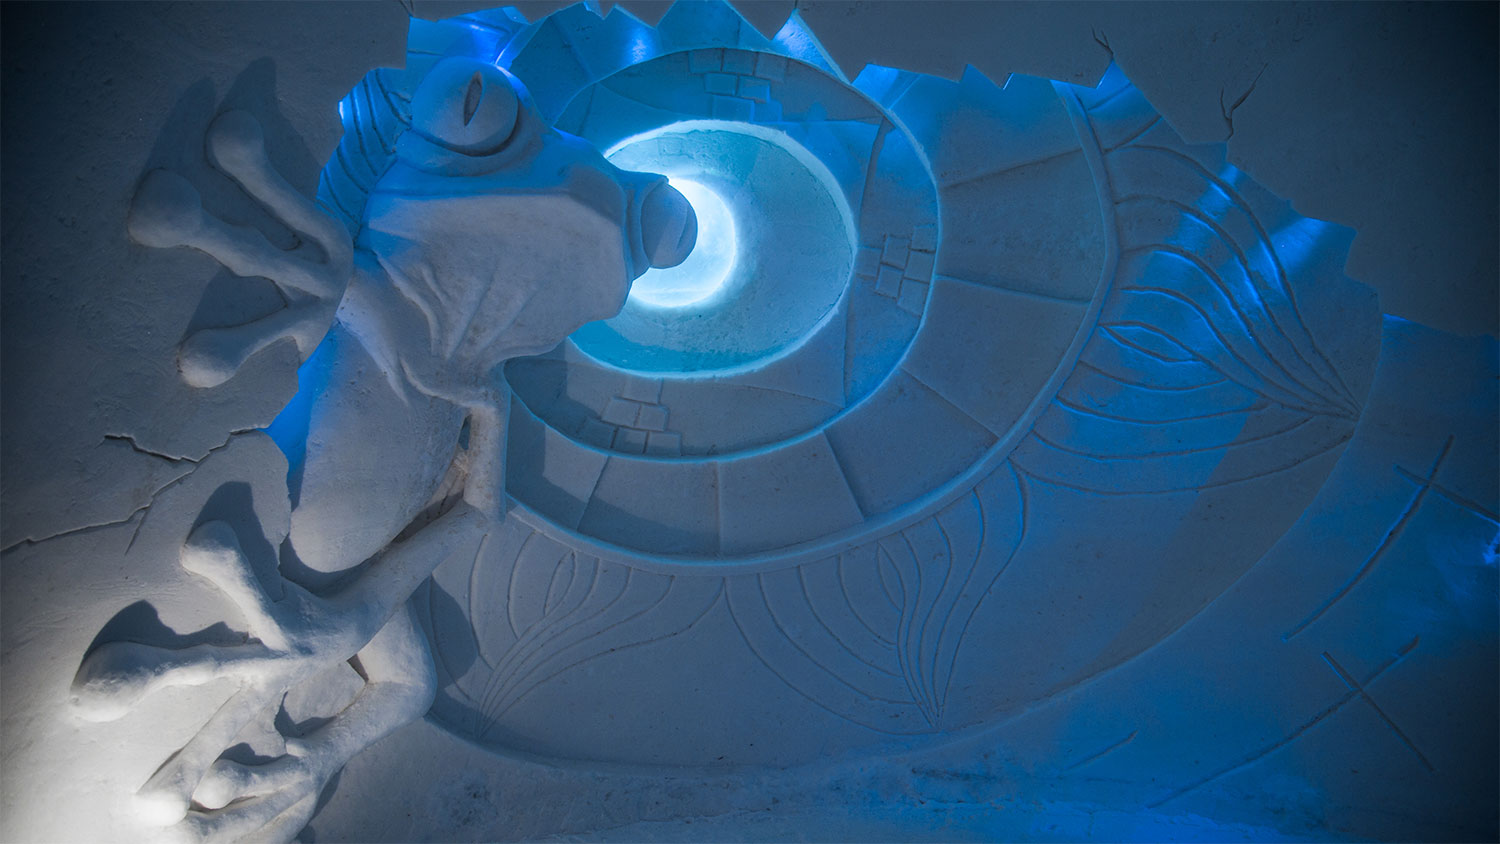 lapland hotels game of thrones, game of thrones ice hotel